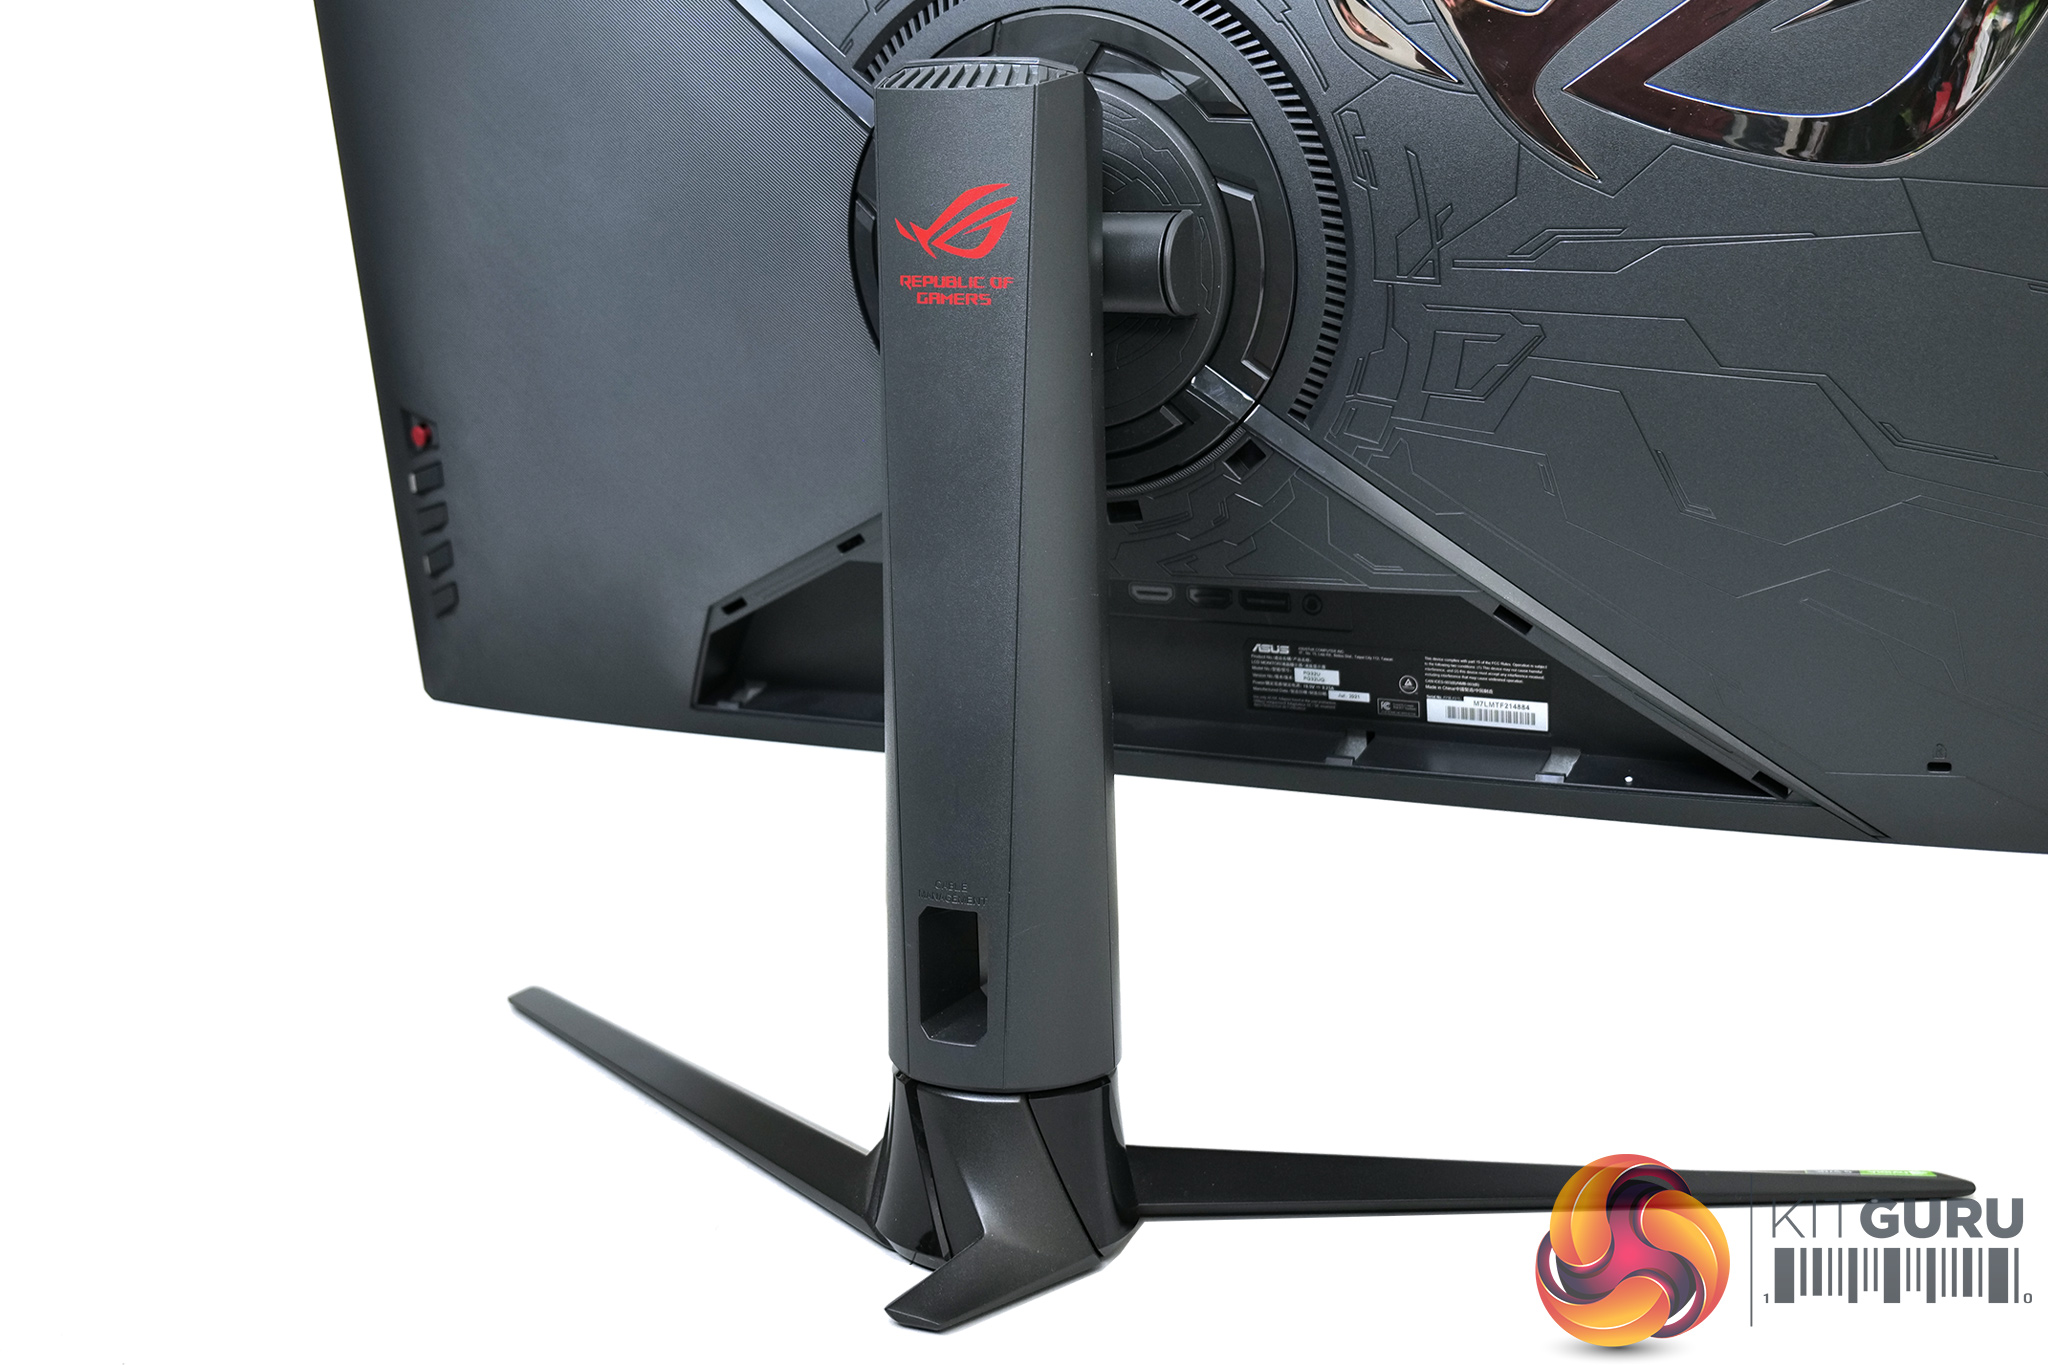 The Best 4K Gaming Monitor? - ASUS ROG PG32UQ Review 